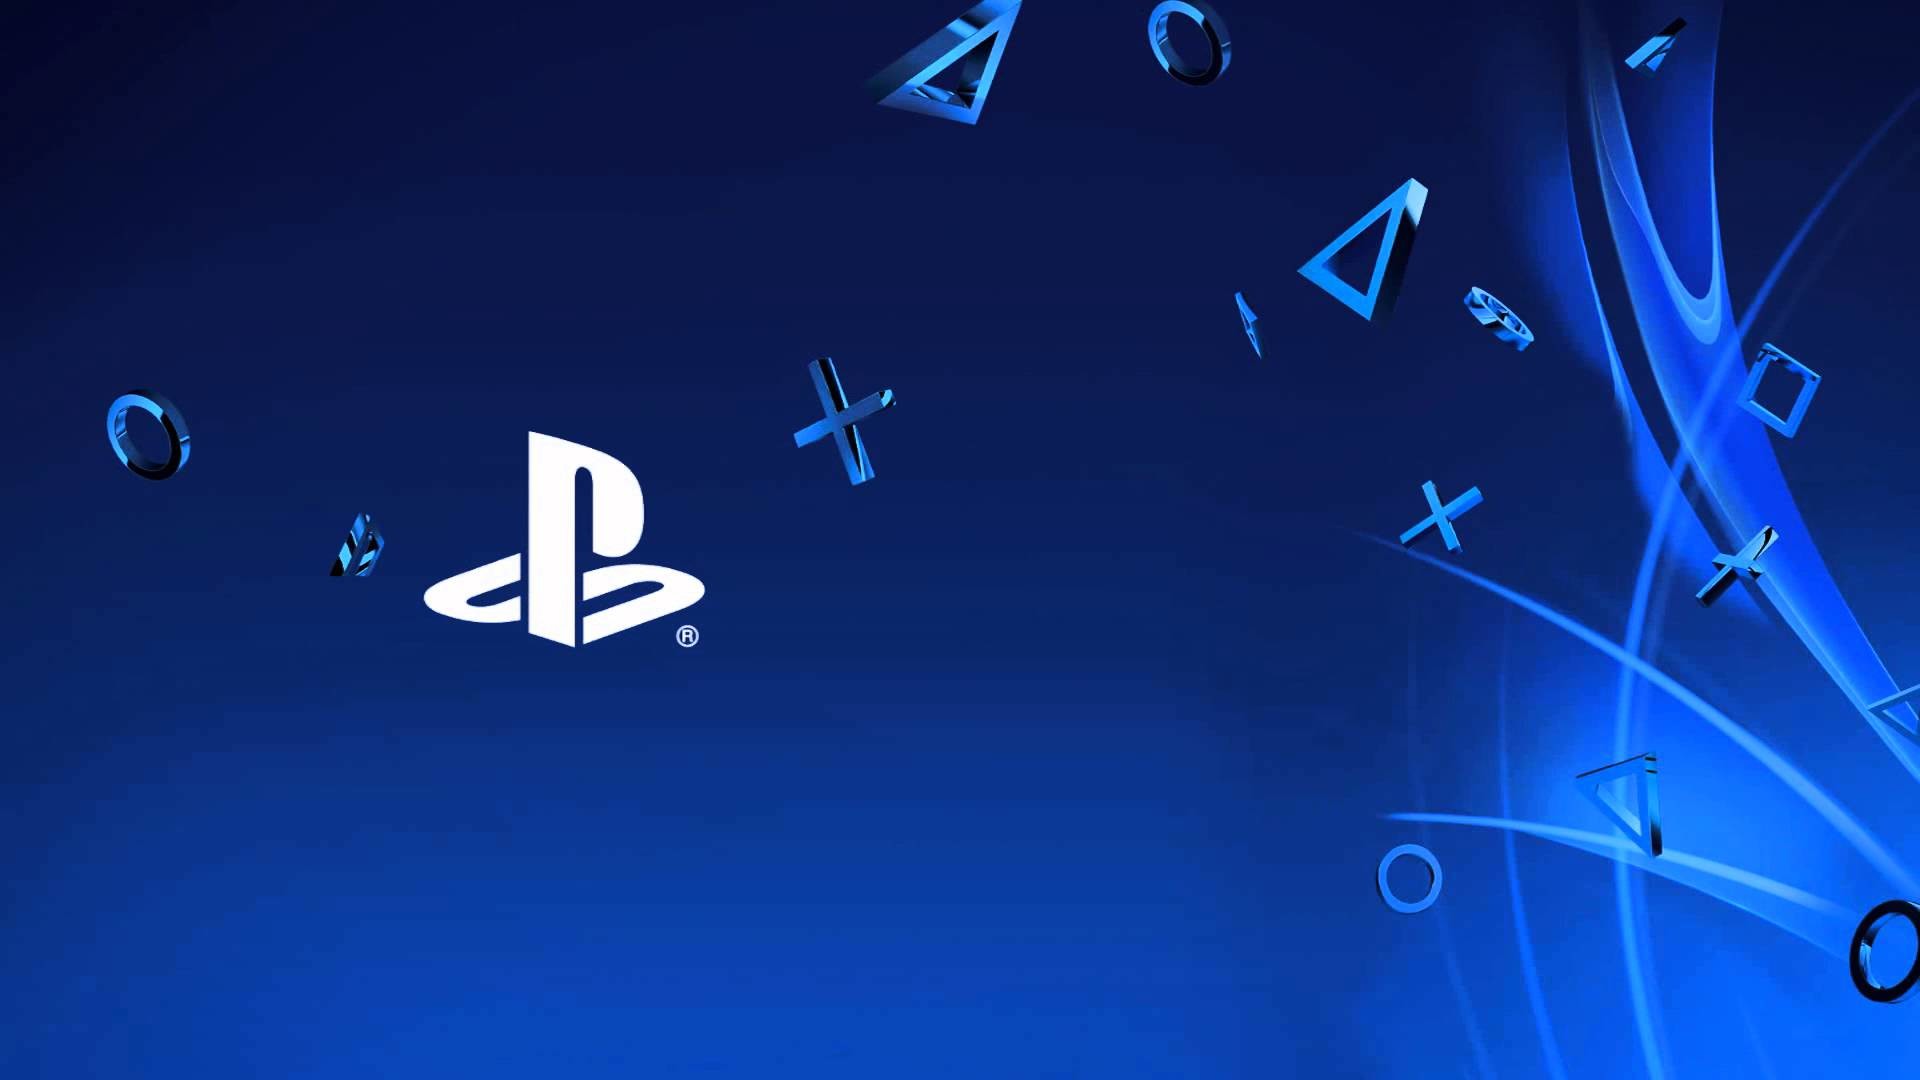 Ps4 Themes Wallpapers